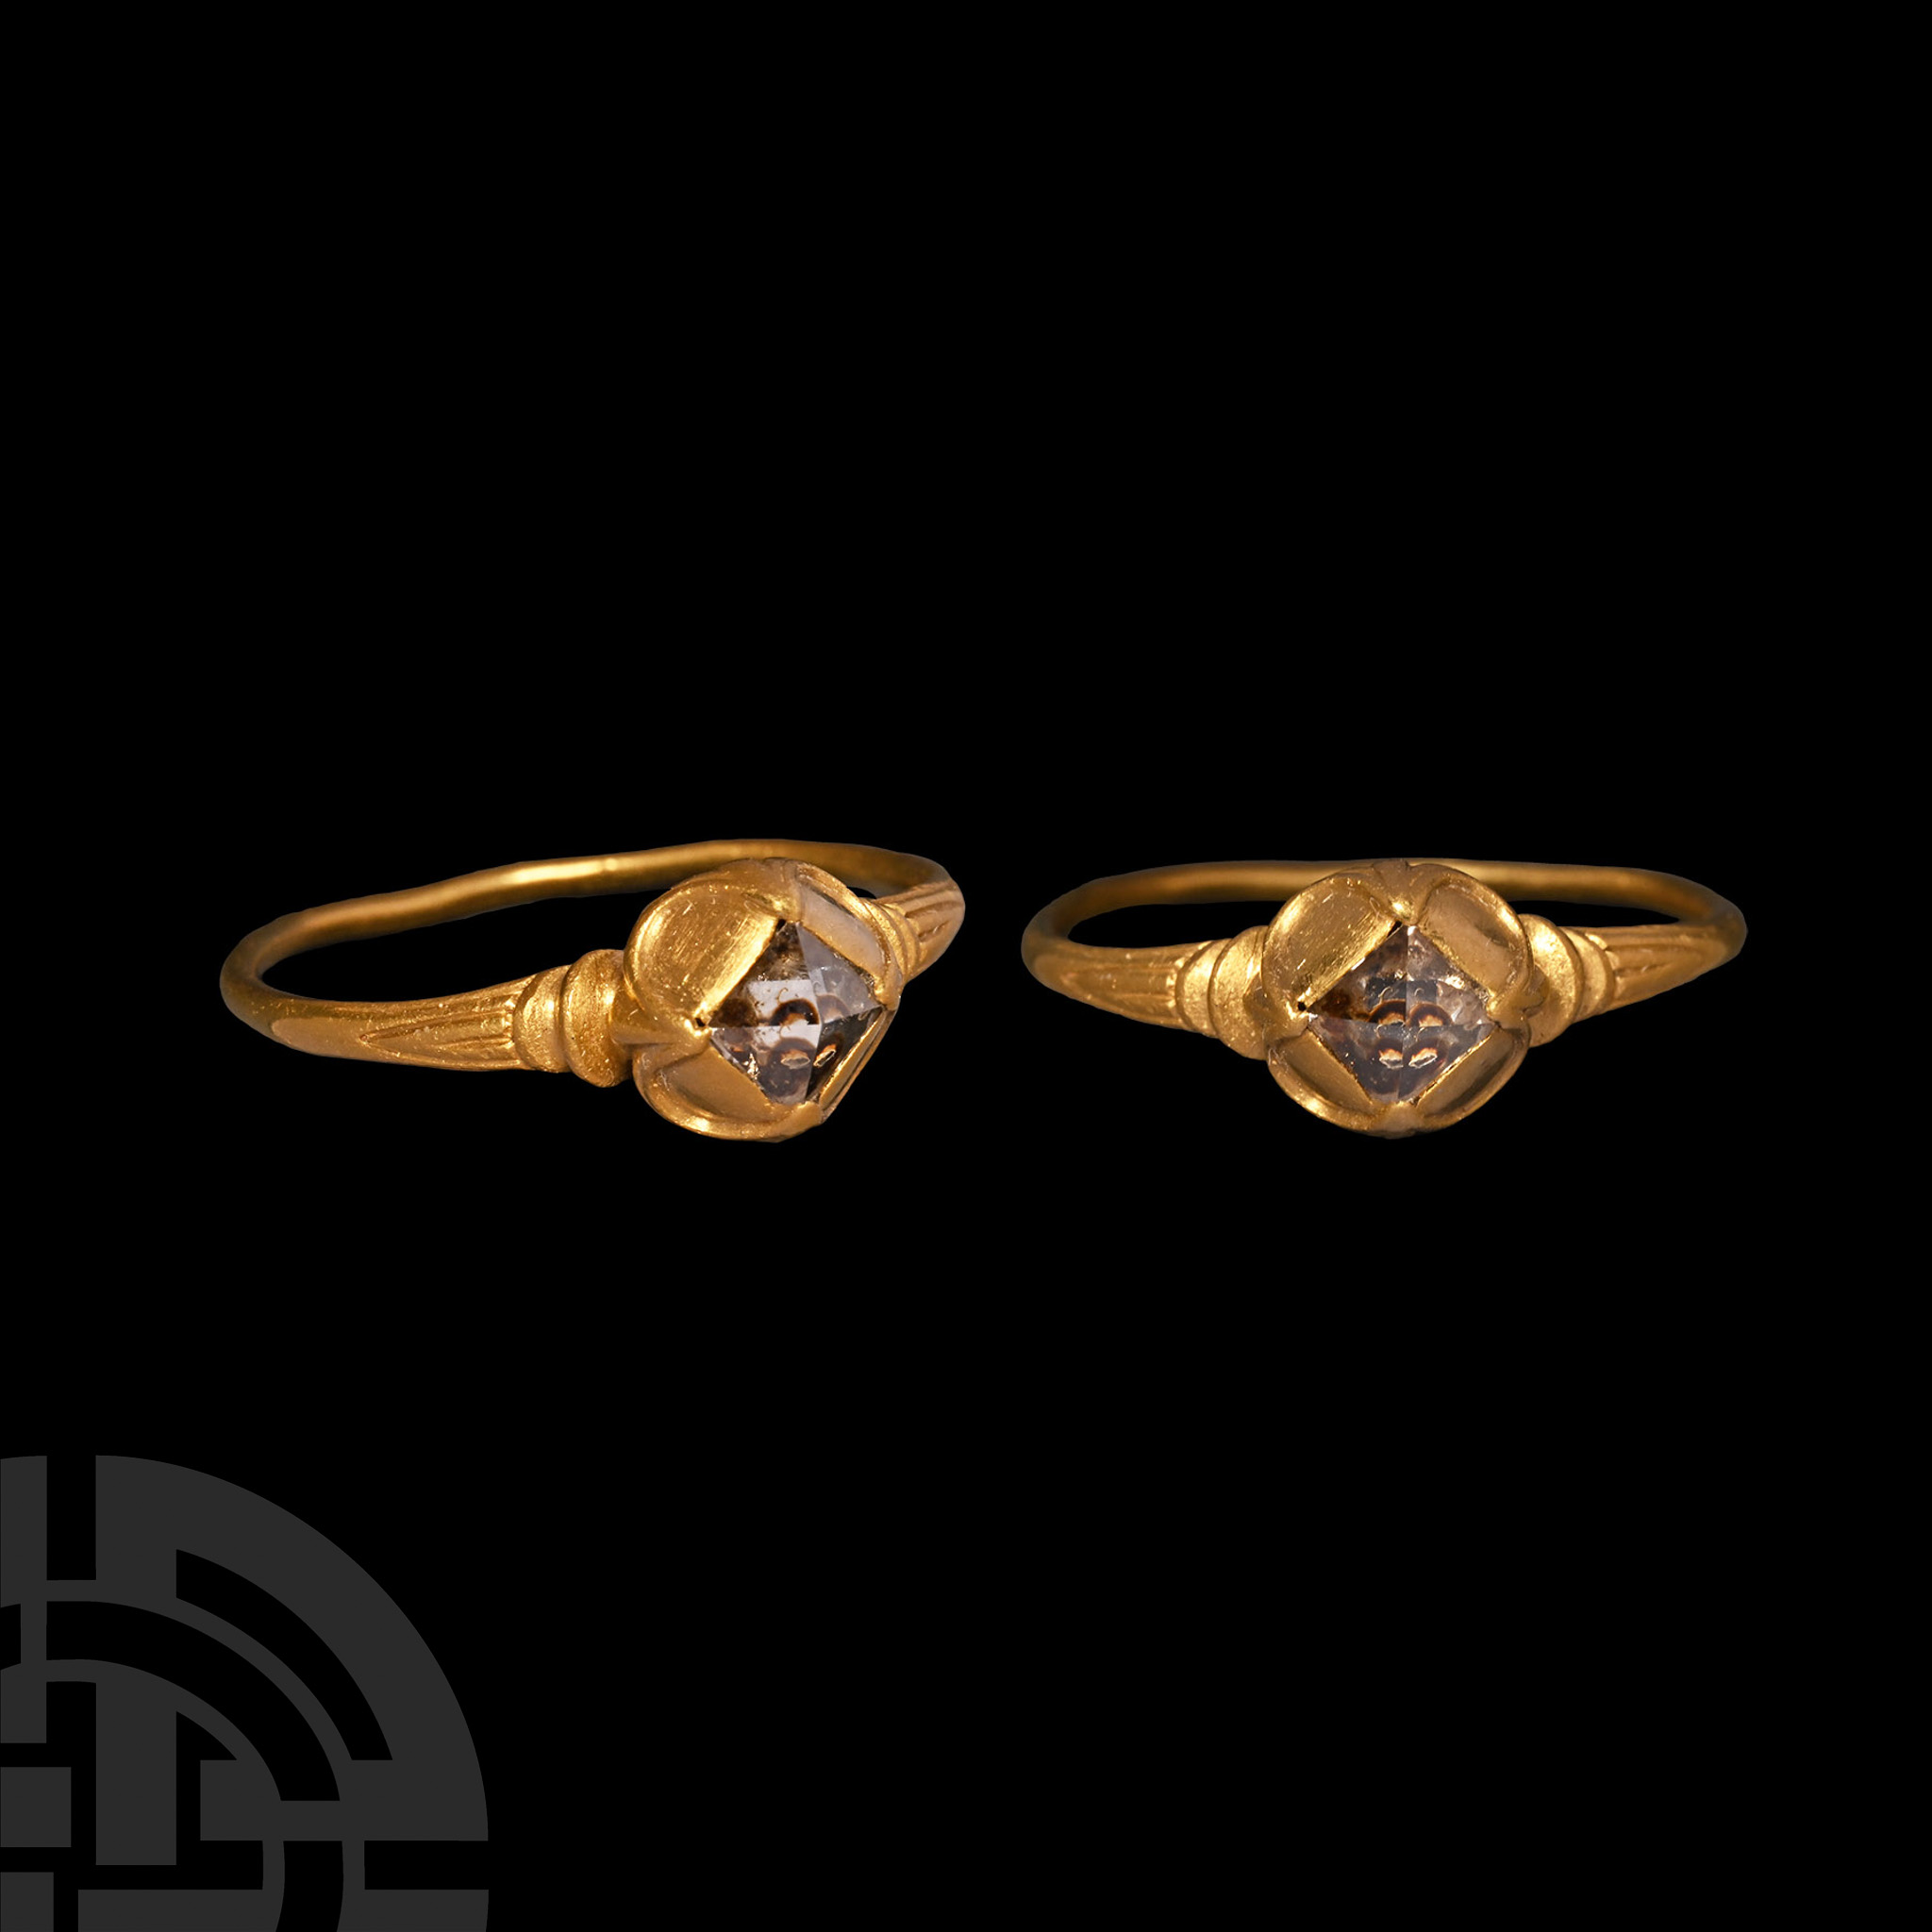 Elizabethan Period Gold Ring with Polished Natural Diamond Crystal